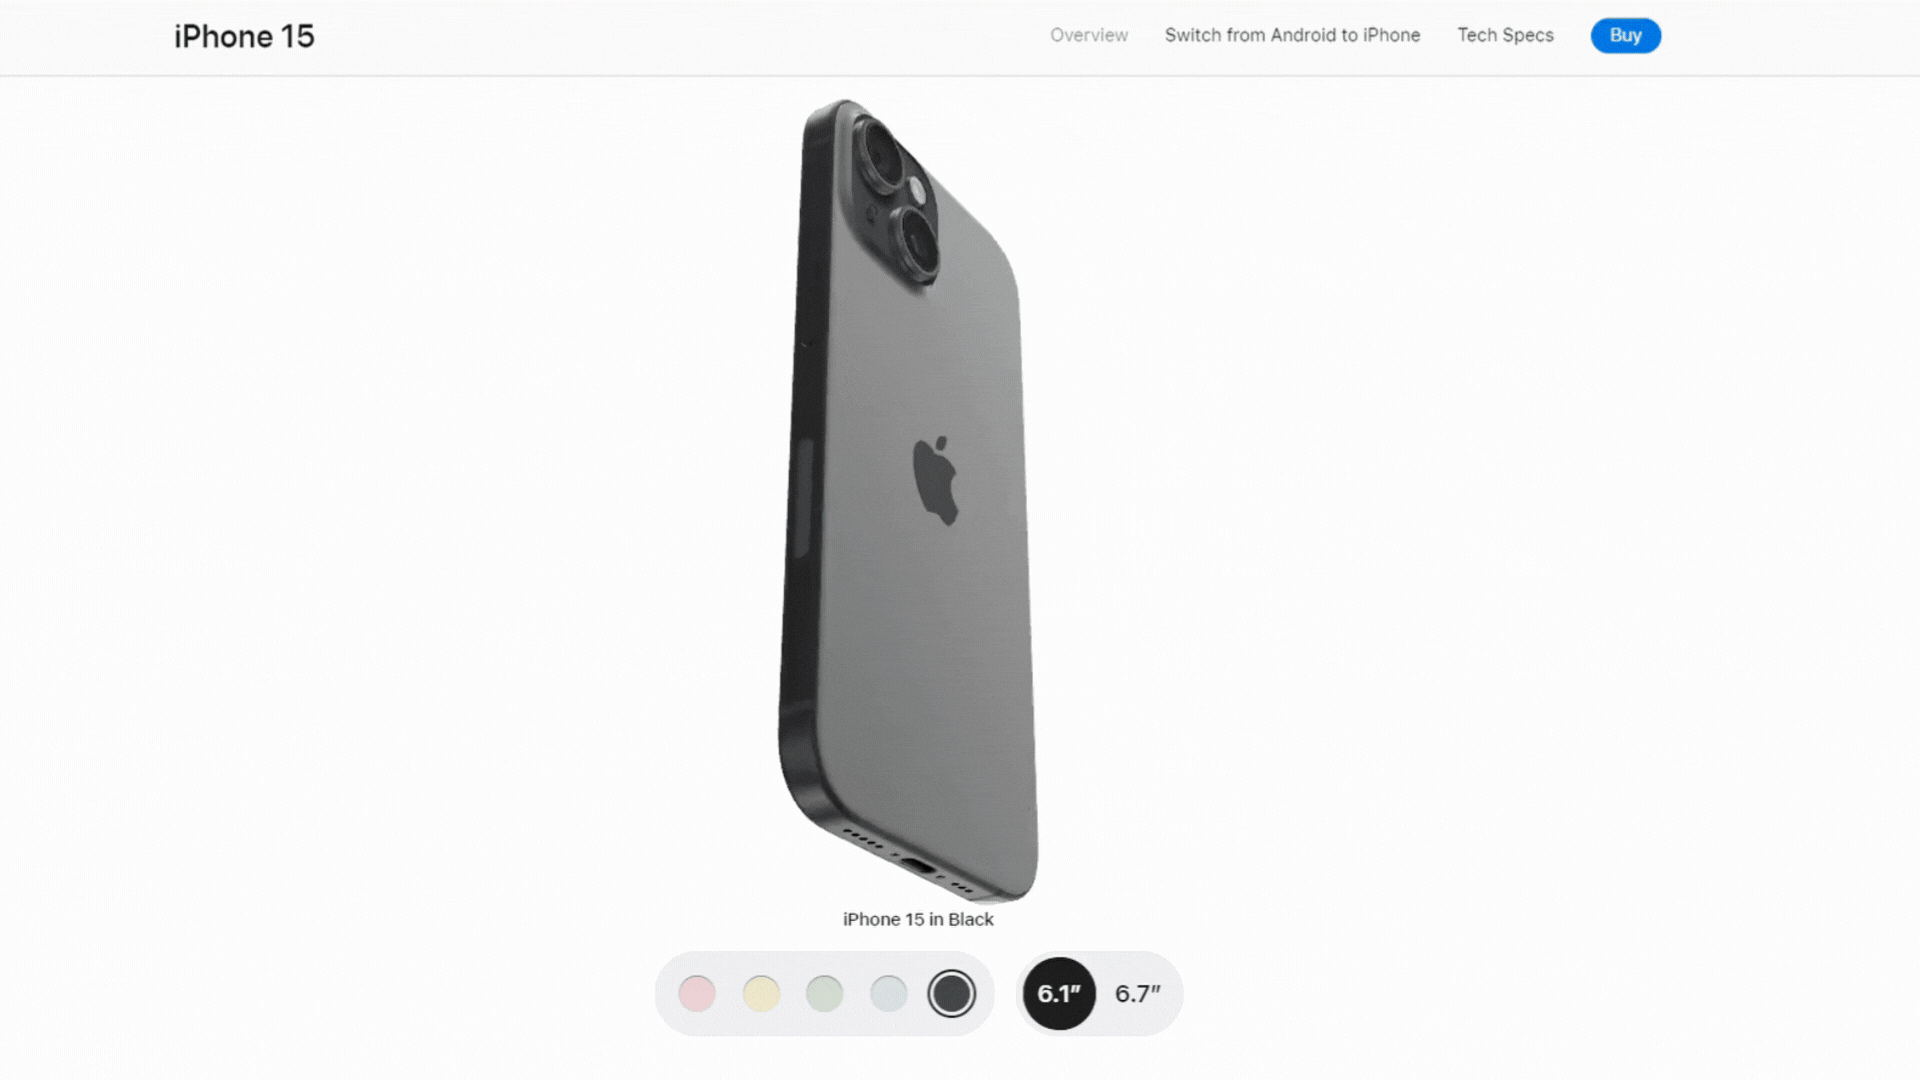 3D Web Design example on Apple iPhone product page.